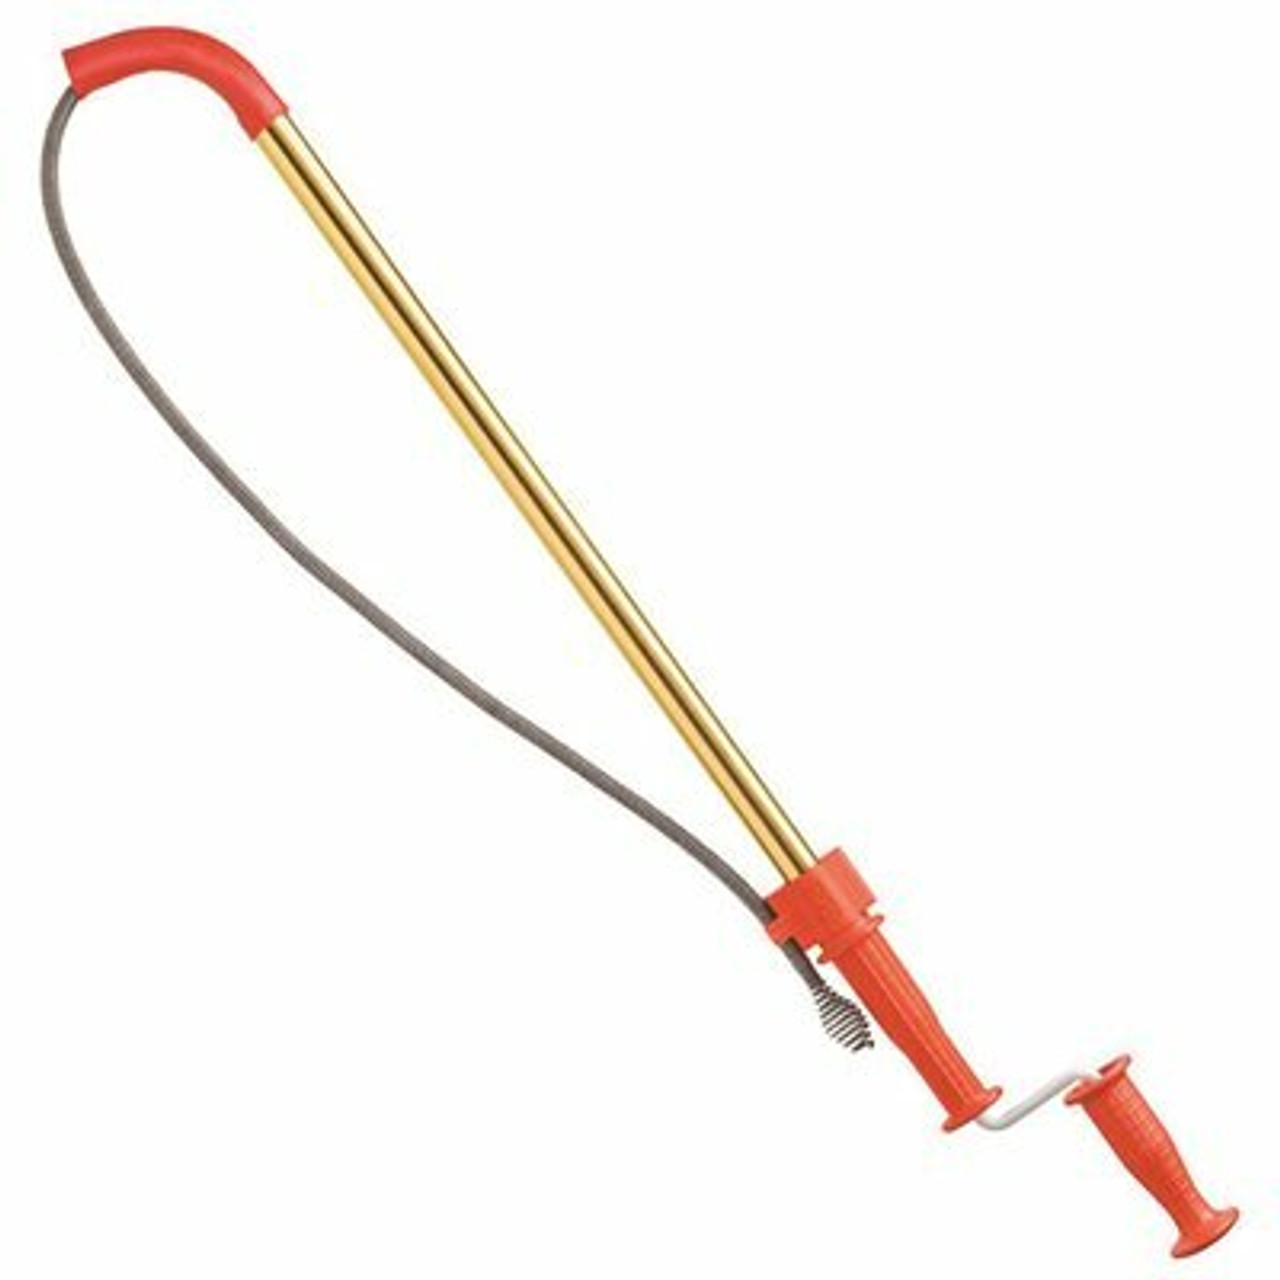 Ridgid 6 Ft. K-6 Dh Toilet Auger With Drop Head